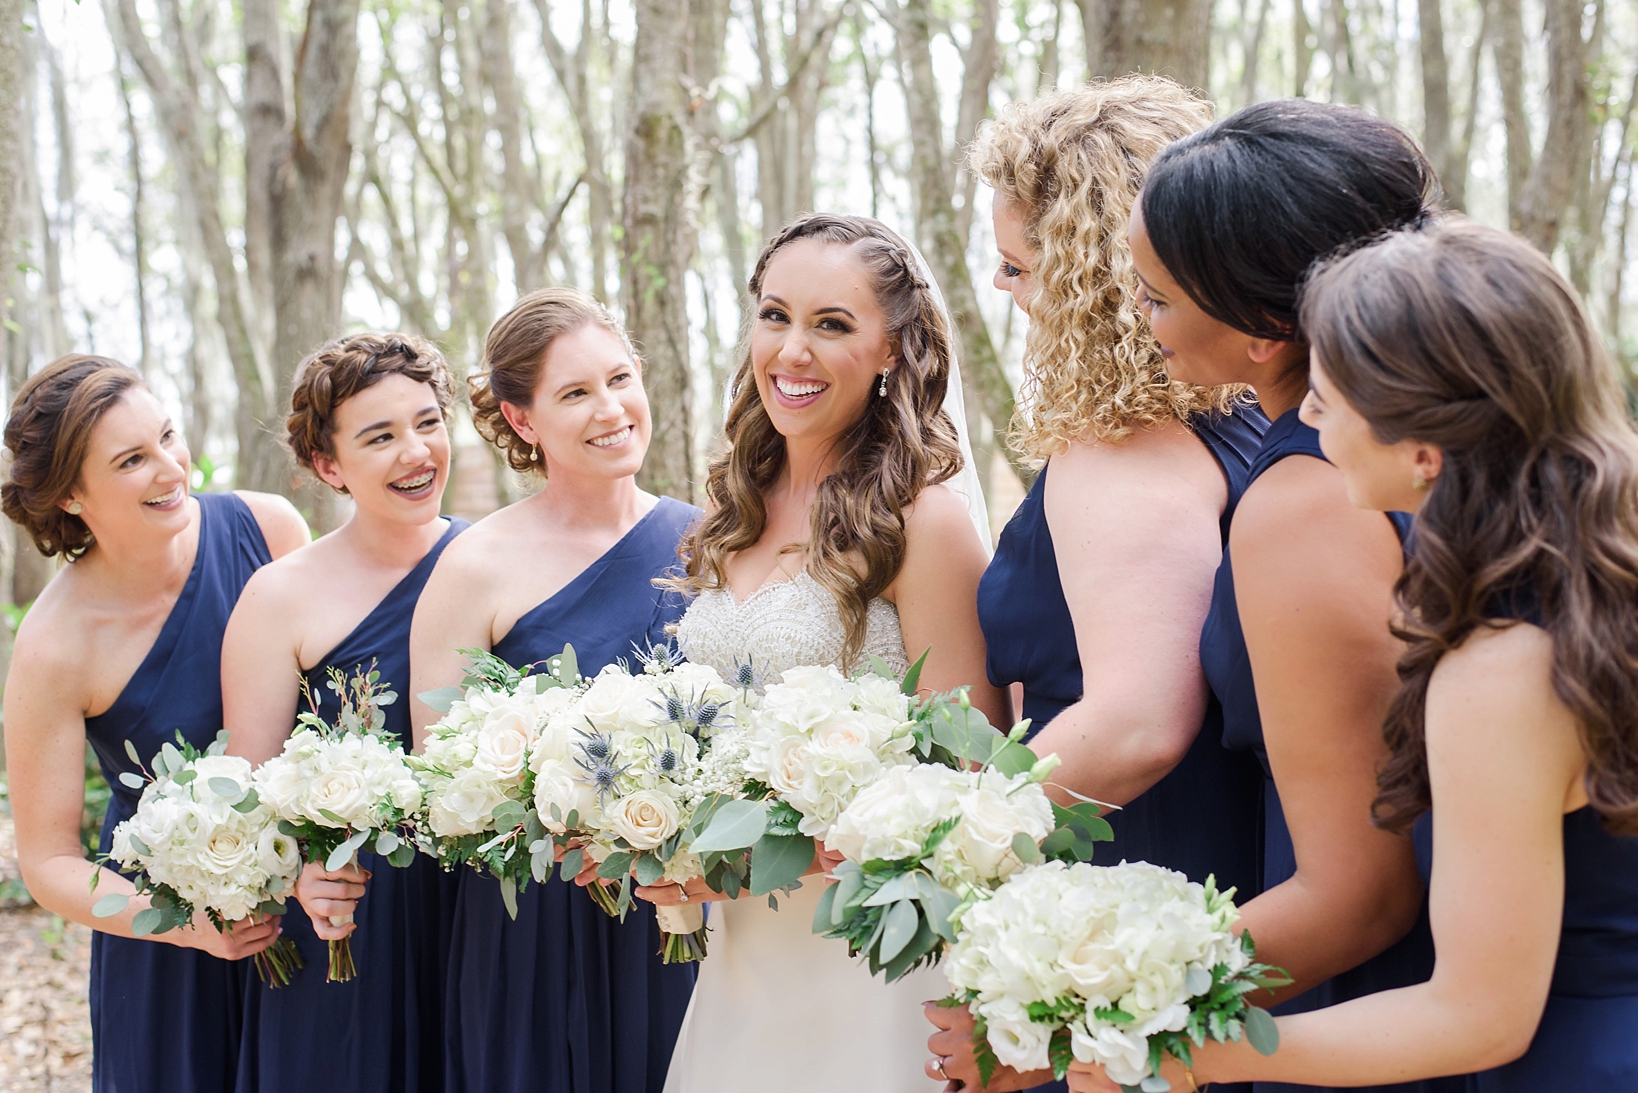 The Bride and her Bridesmaids smiling in the rustic forests of Plant City, FL